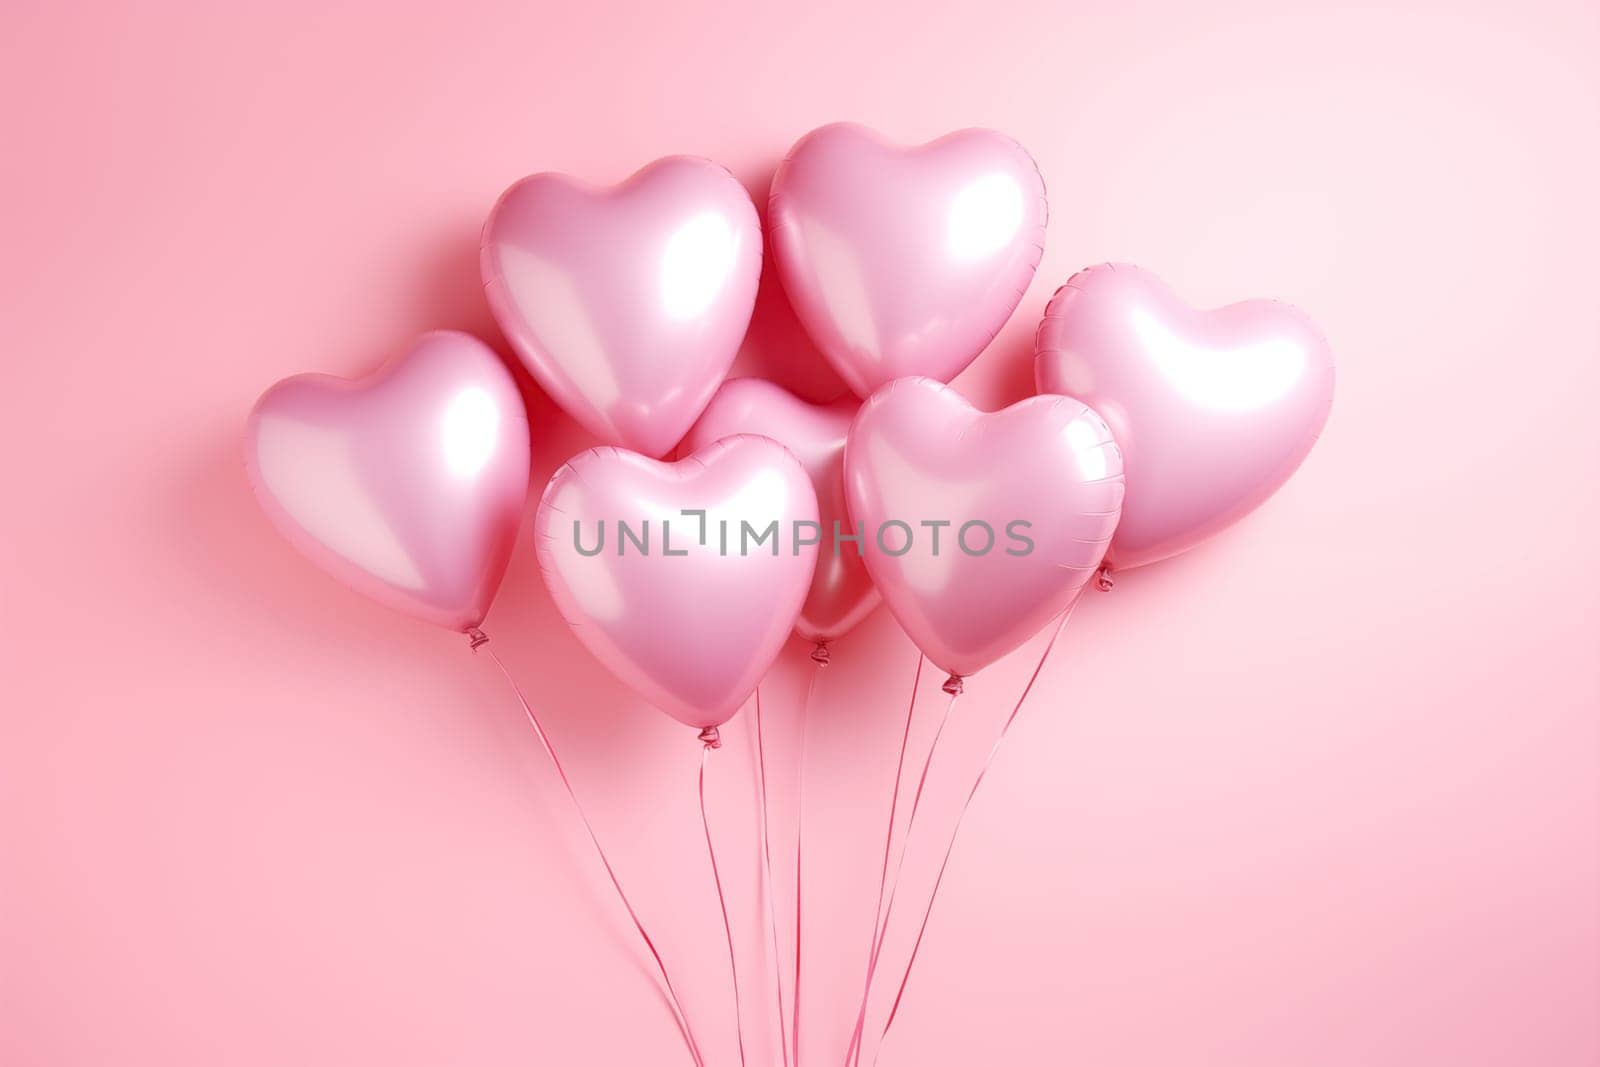 Bunch of glossy pink heart-shaped balloons against a soft pink background, perfect for Valentine’s Day, anniversaries, or any romantic occasion